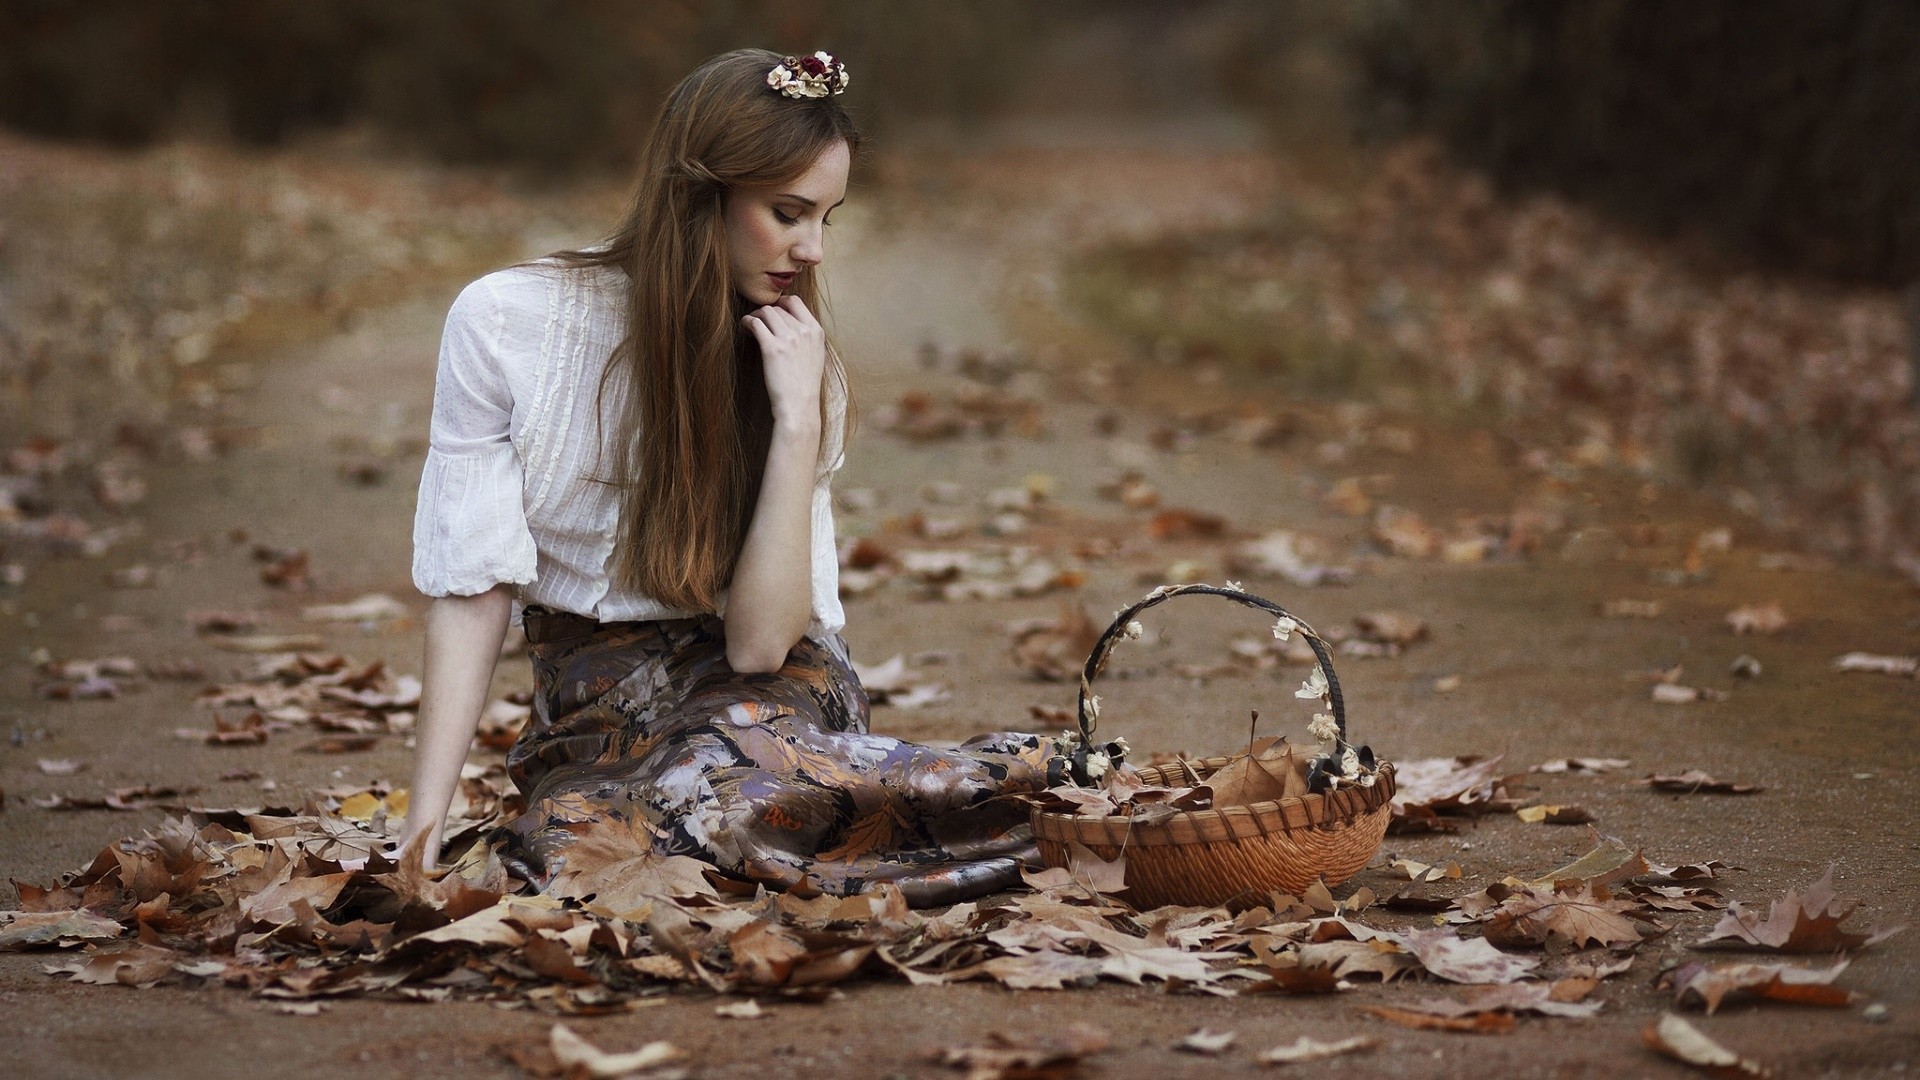 Fall Leaves Sitting Outdoors Women Outdoors Women Model On The Ground Baskets White Shirt Shirt Look 1920x1080